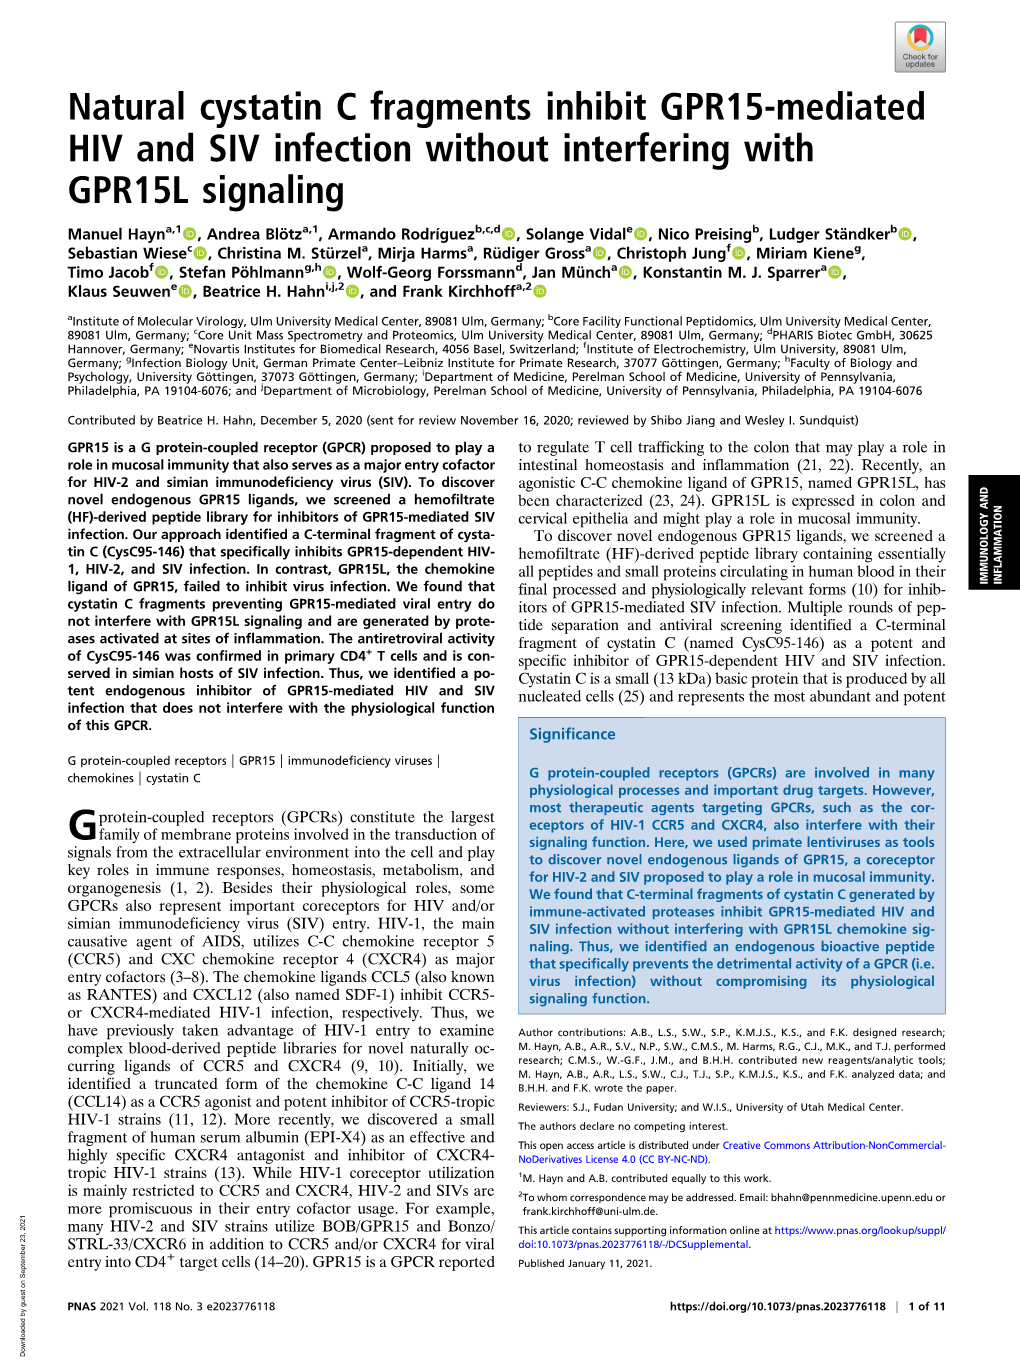 Natural Cystatin C Fragments Inhibit GPR15-Mediated HIV and SIV Infection Without Interfering with GPR15L Signaling